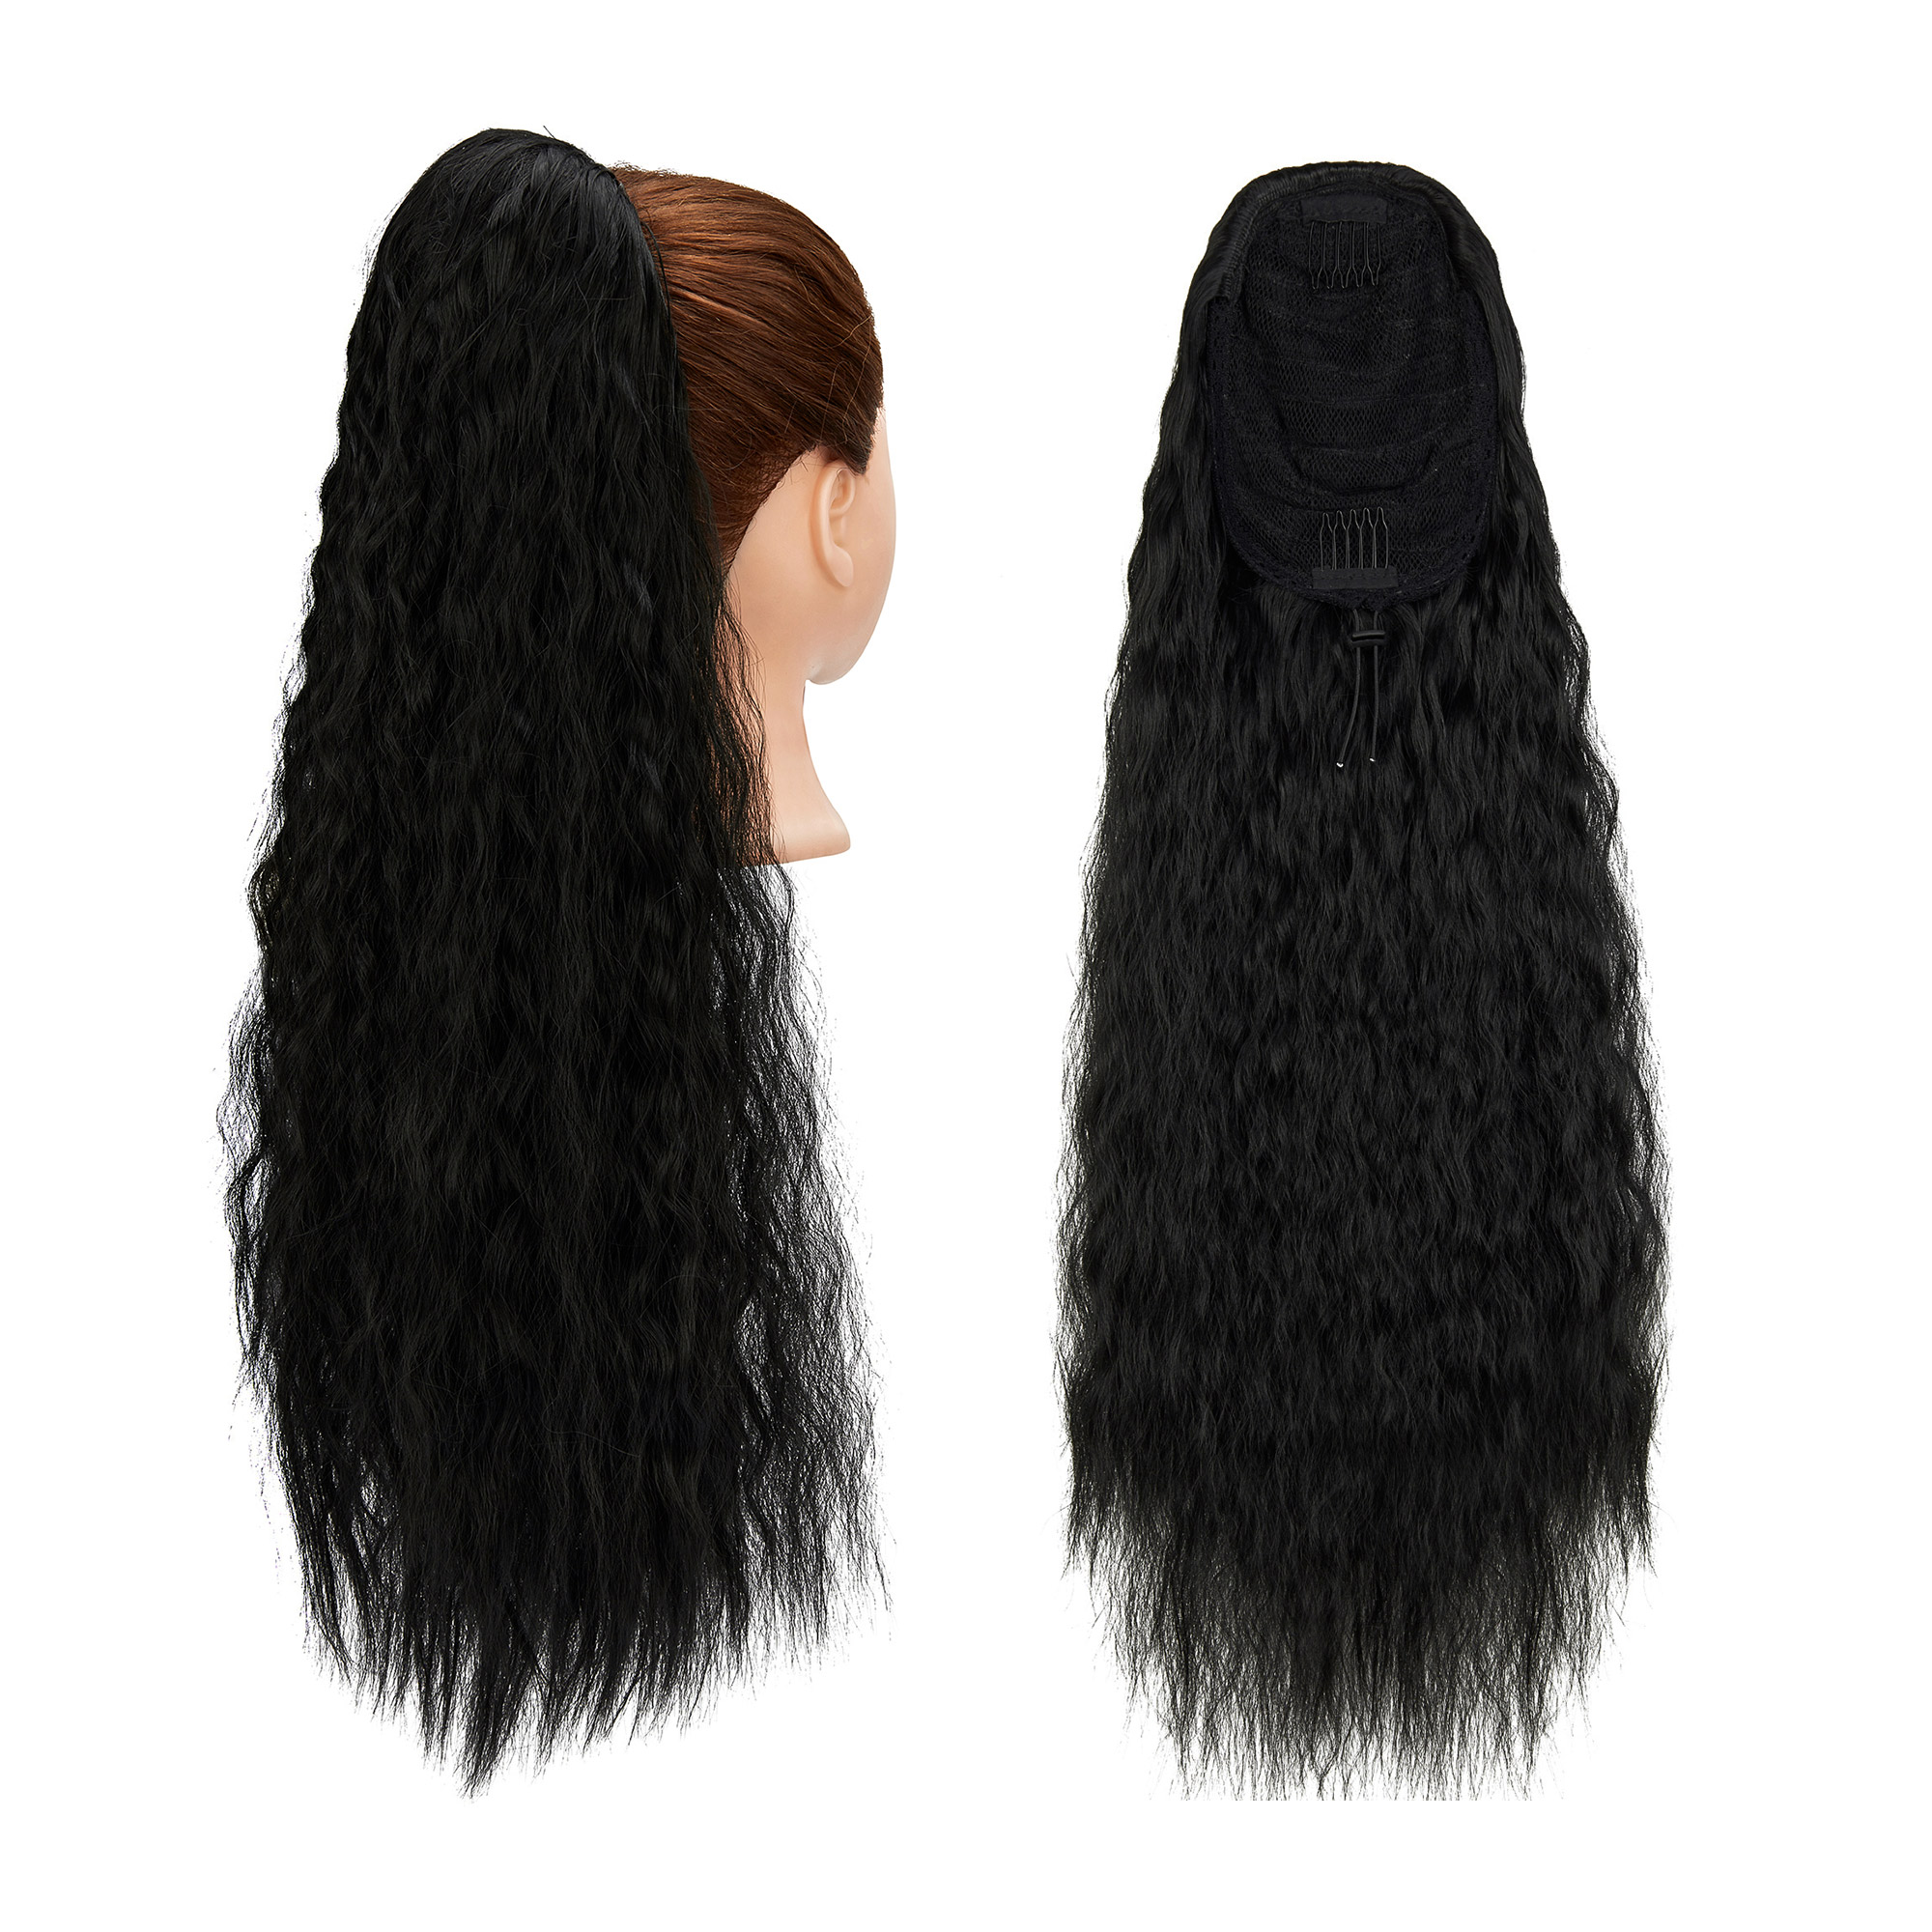 Long KiSAYFUTy Straight Drawstring Ponytail for Black Women, Curly Hair 24 Inch 130g Clip in Ponytail Extension Curly Drawstring Ponytail - image 1 of 8